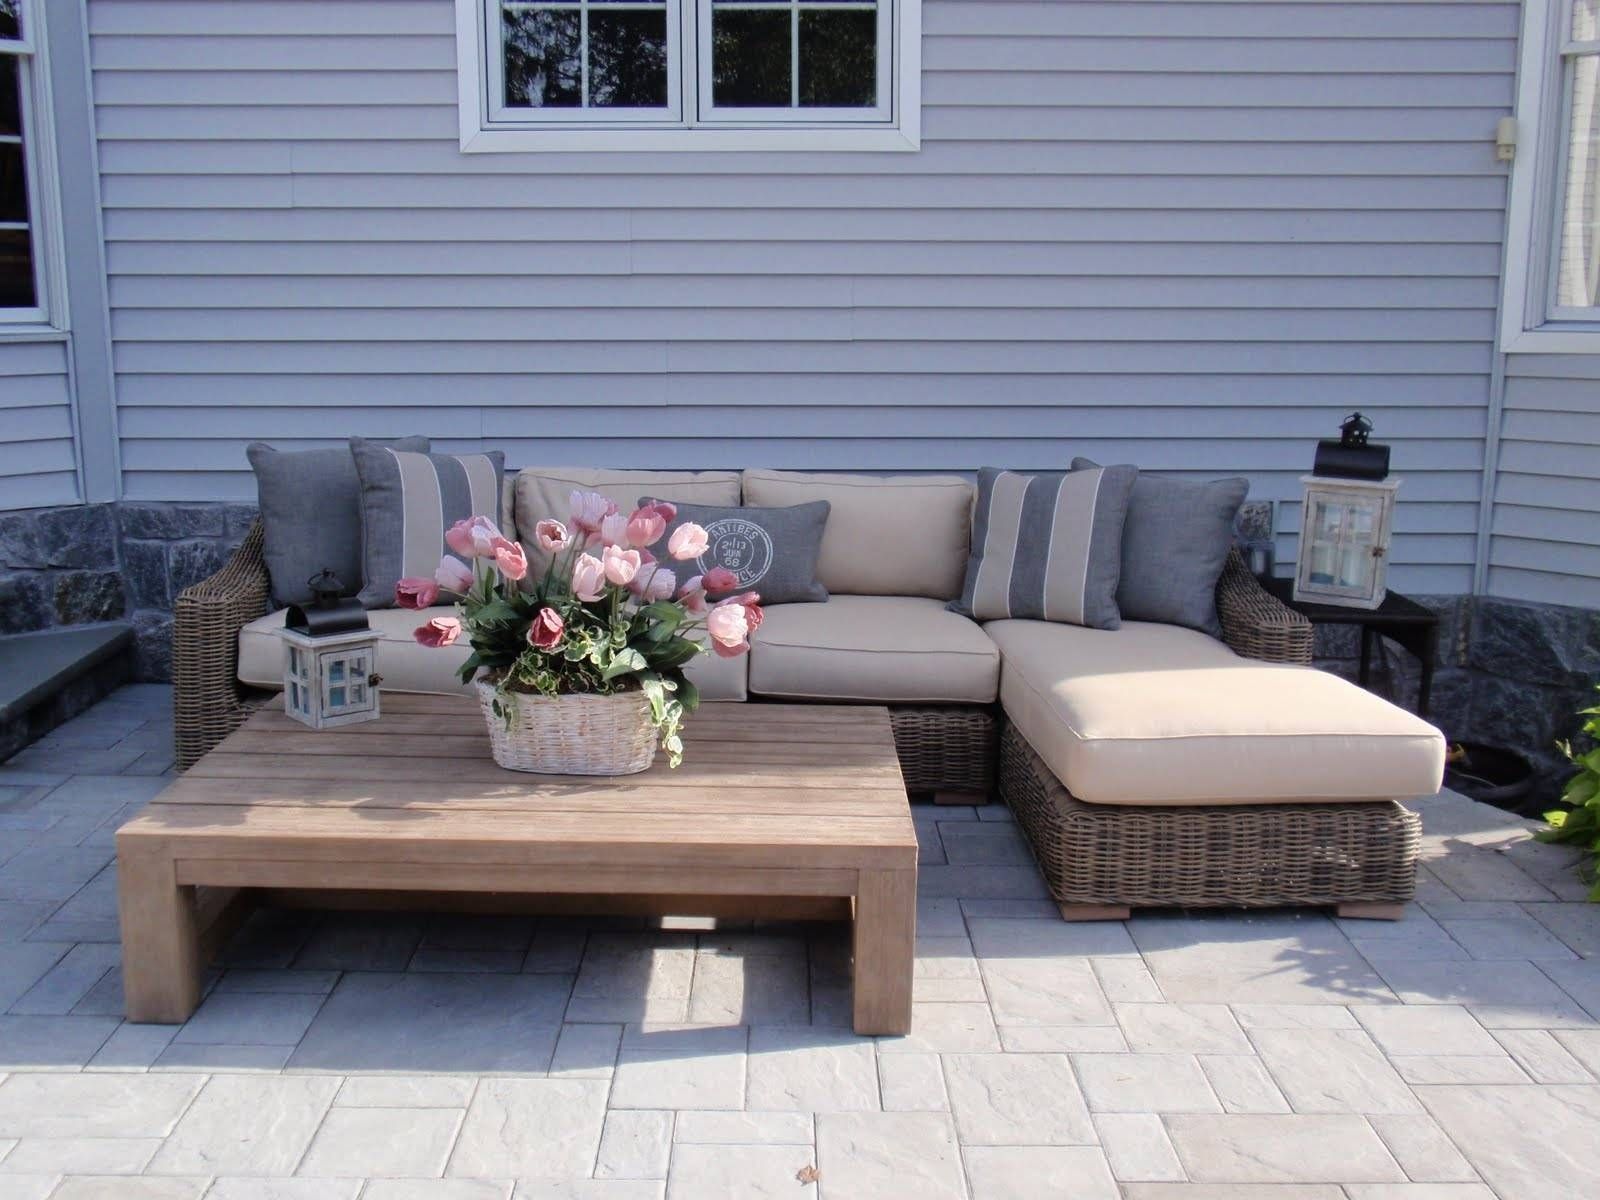 Patio Coffee Table For The Backyard | Home Furniture And Decor Throughout Large Low Wooden Coffee Tables (View 28 of 30)